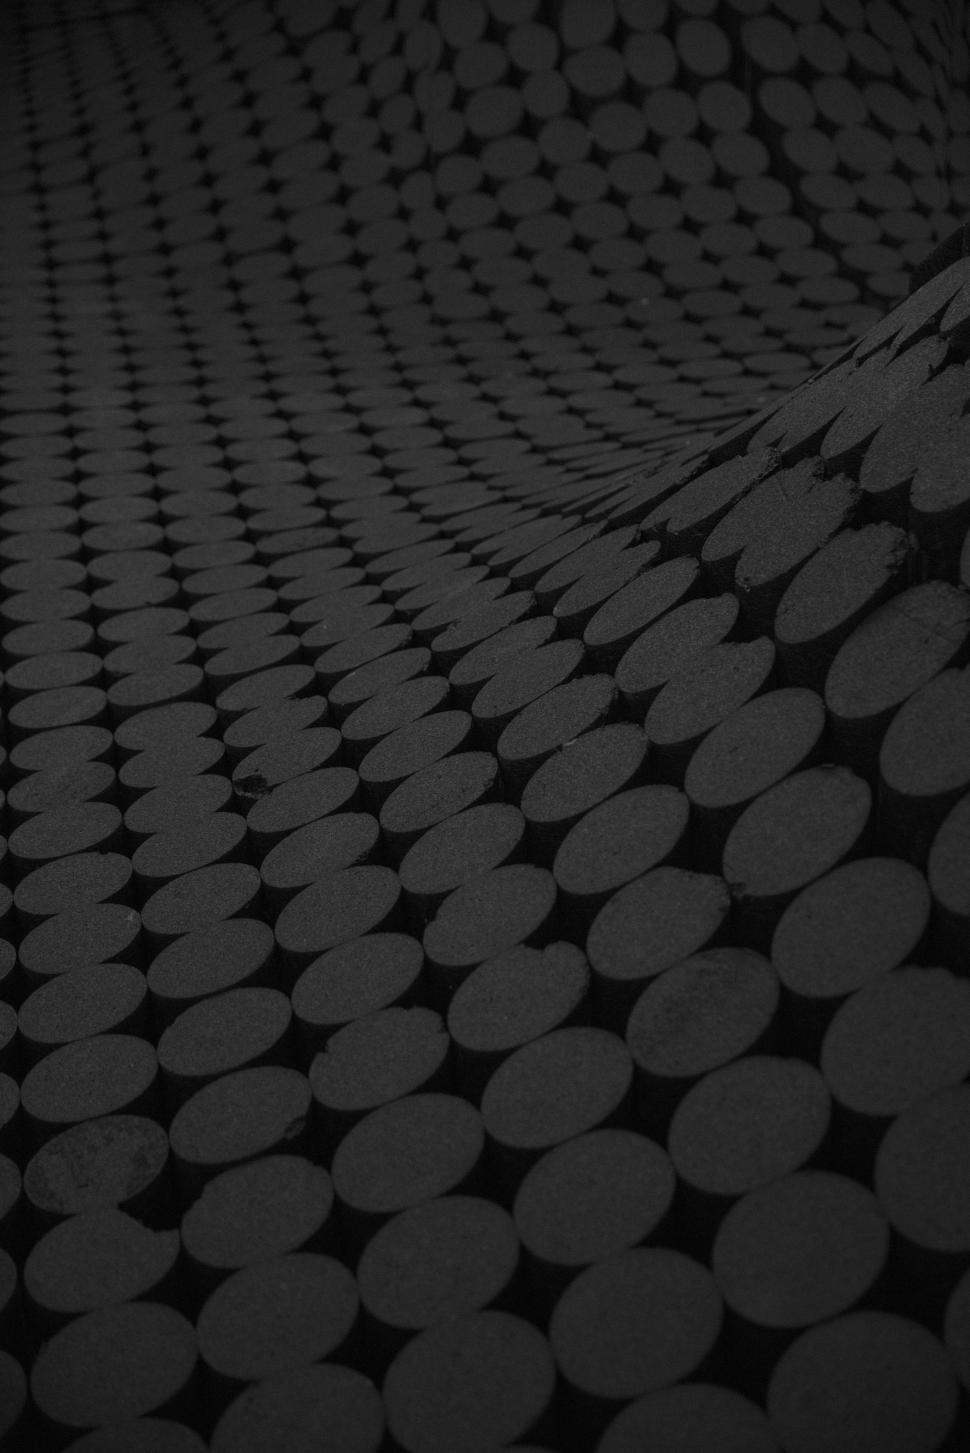 Free Image of Pattern of Circles in Black and White 